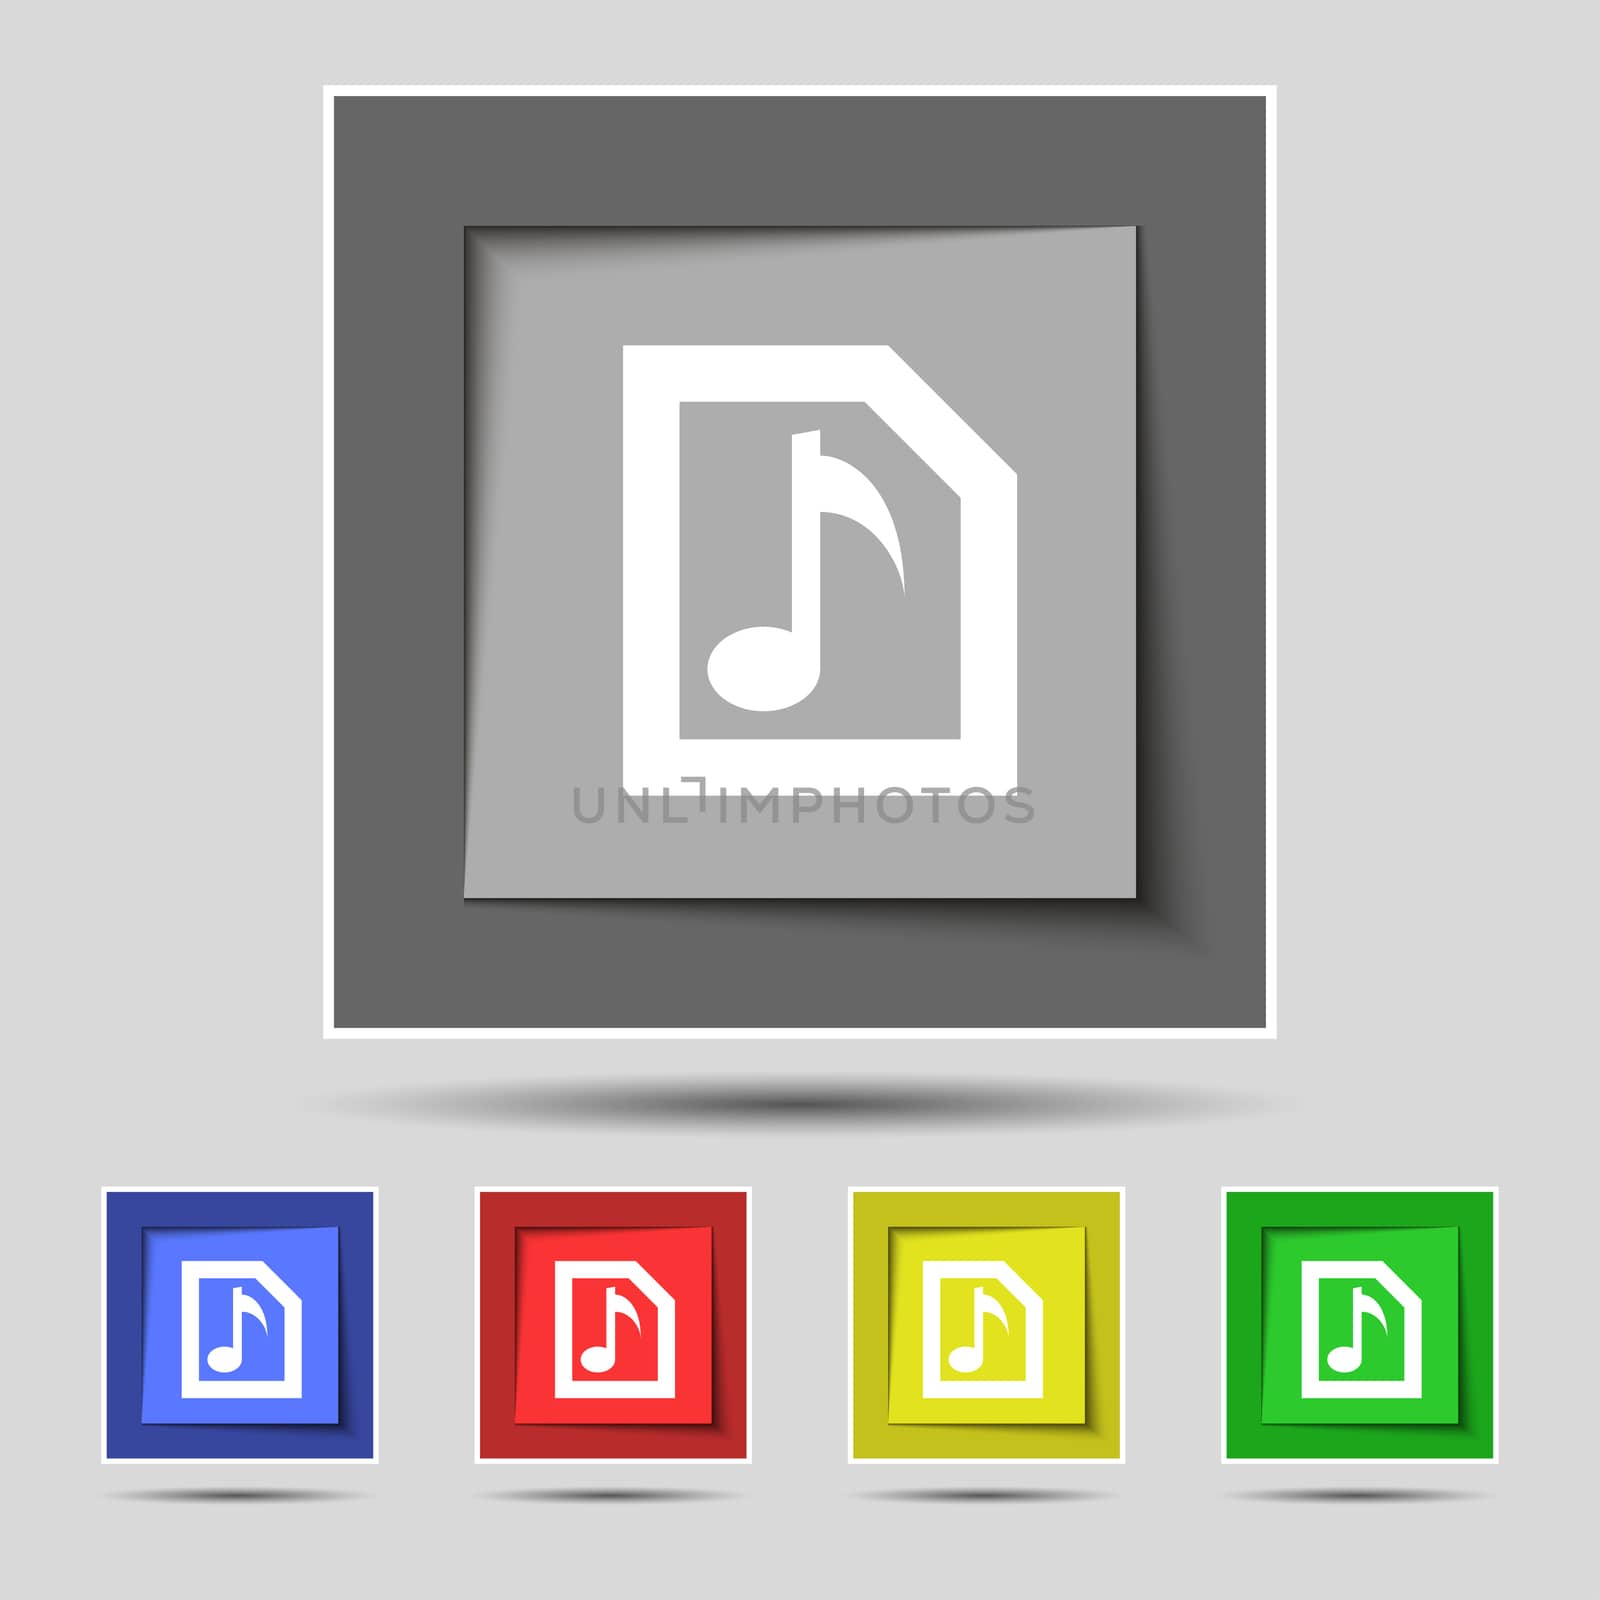 Audio, MP3 file icon sign on the original five colored buttons. illustration